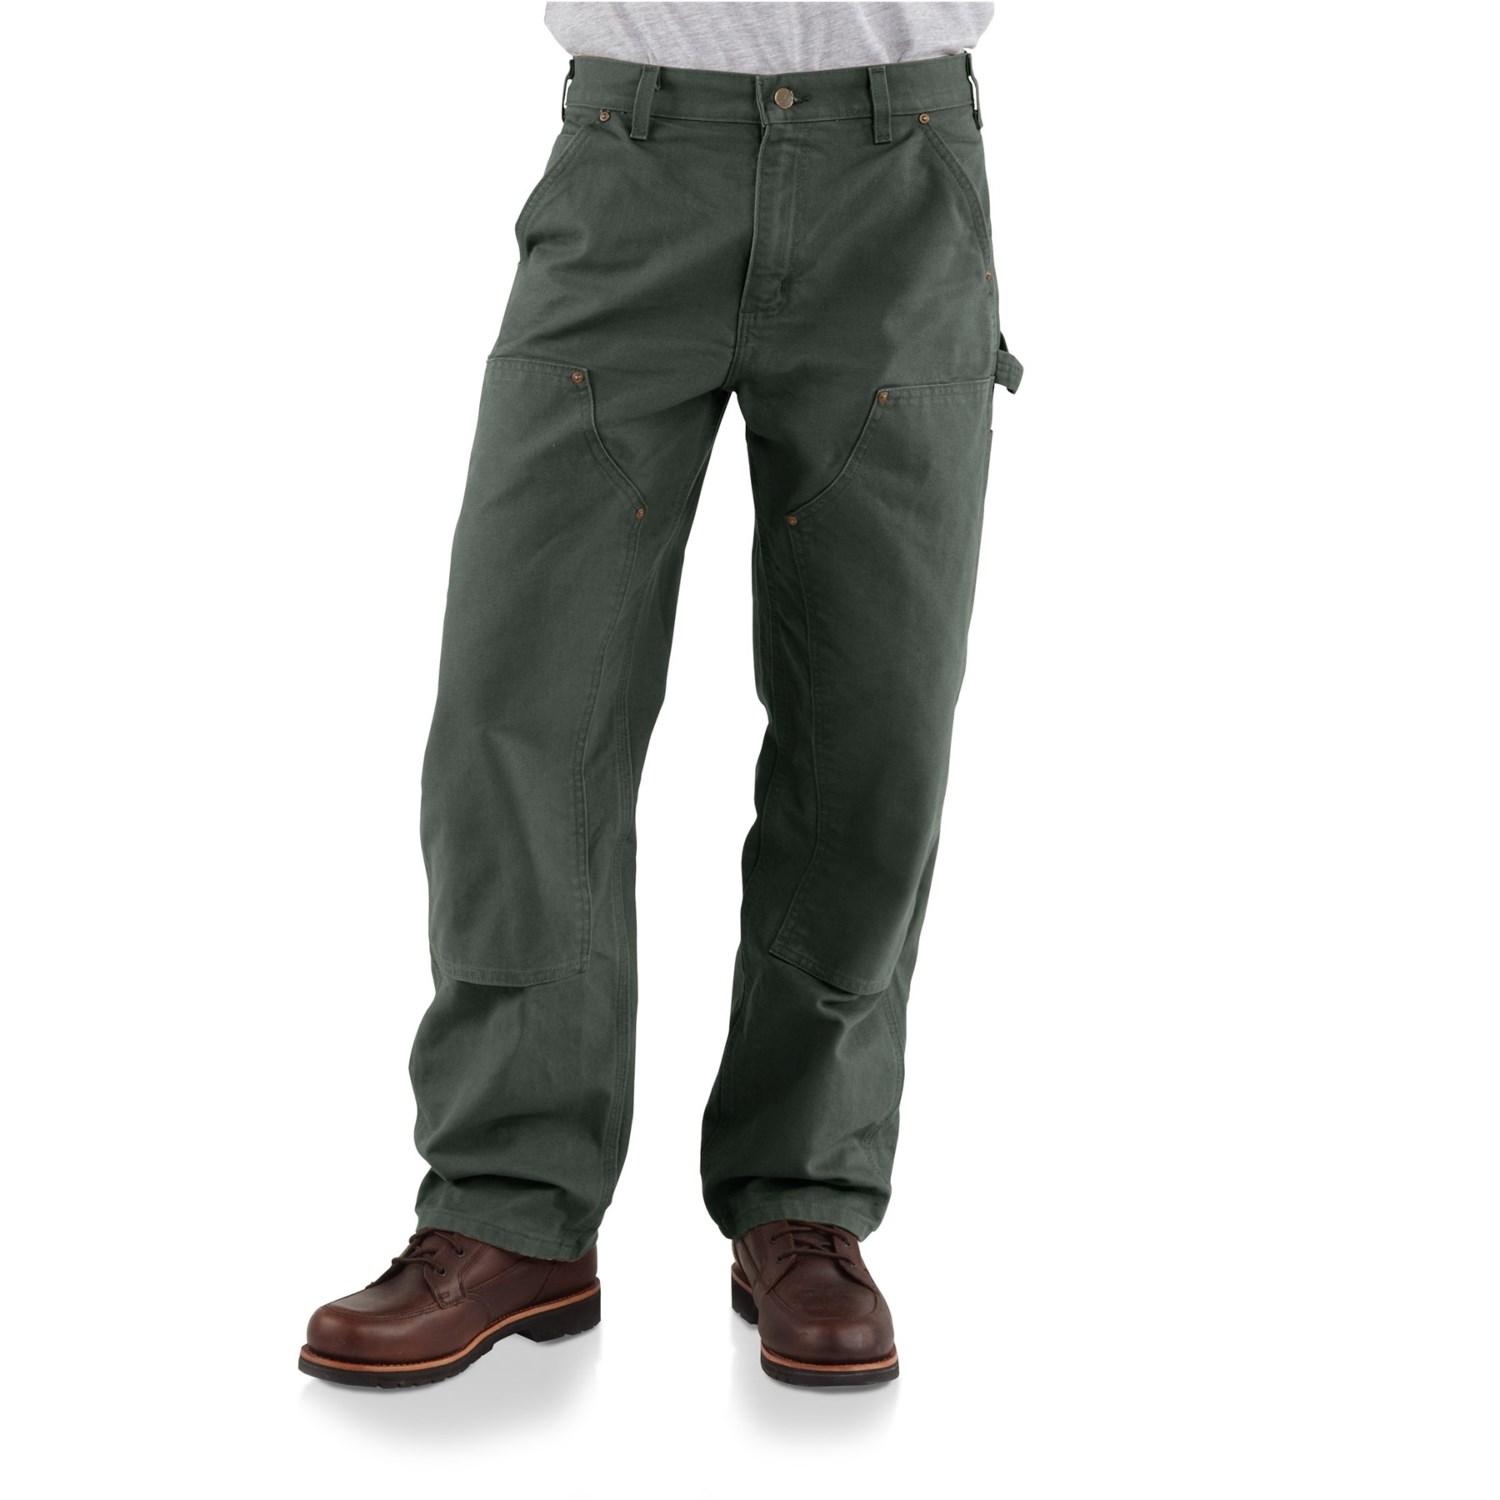 Carhartt Cotton Double Front Work Dungaree Washed Duck B136 in Moss (Green)  for Men - Lyst